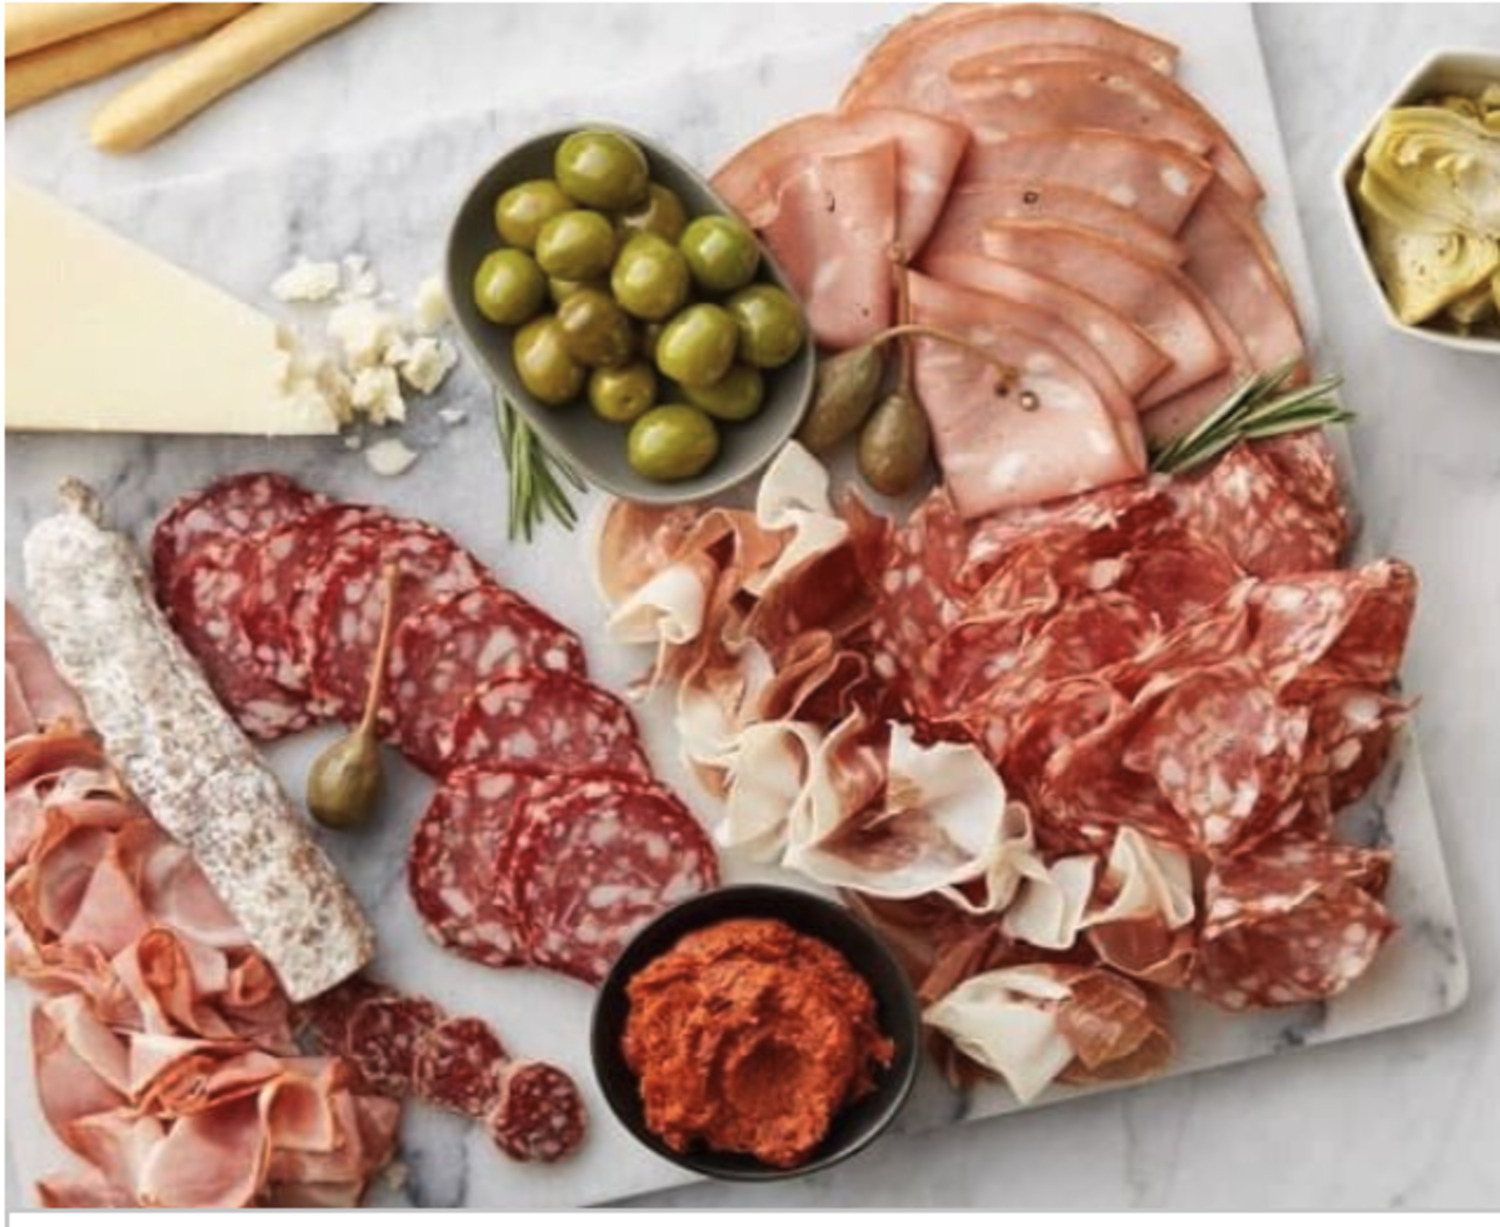 L&W Market's charcuterie board is available to go for Easter. COURTESY L&W MARKET